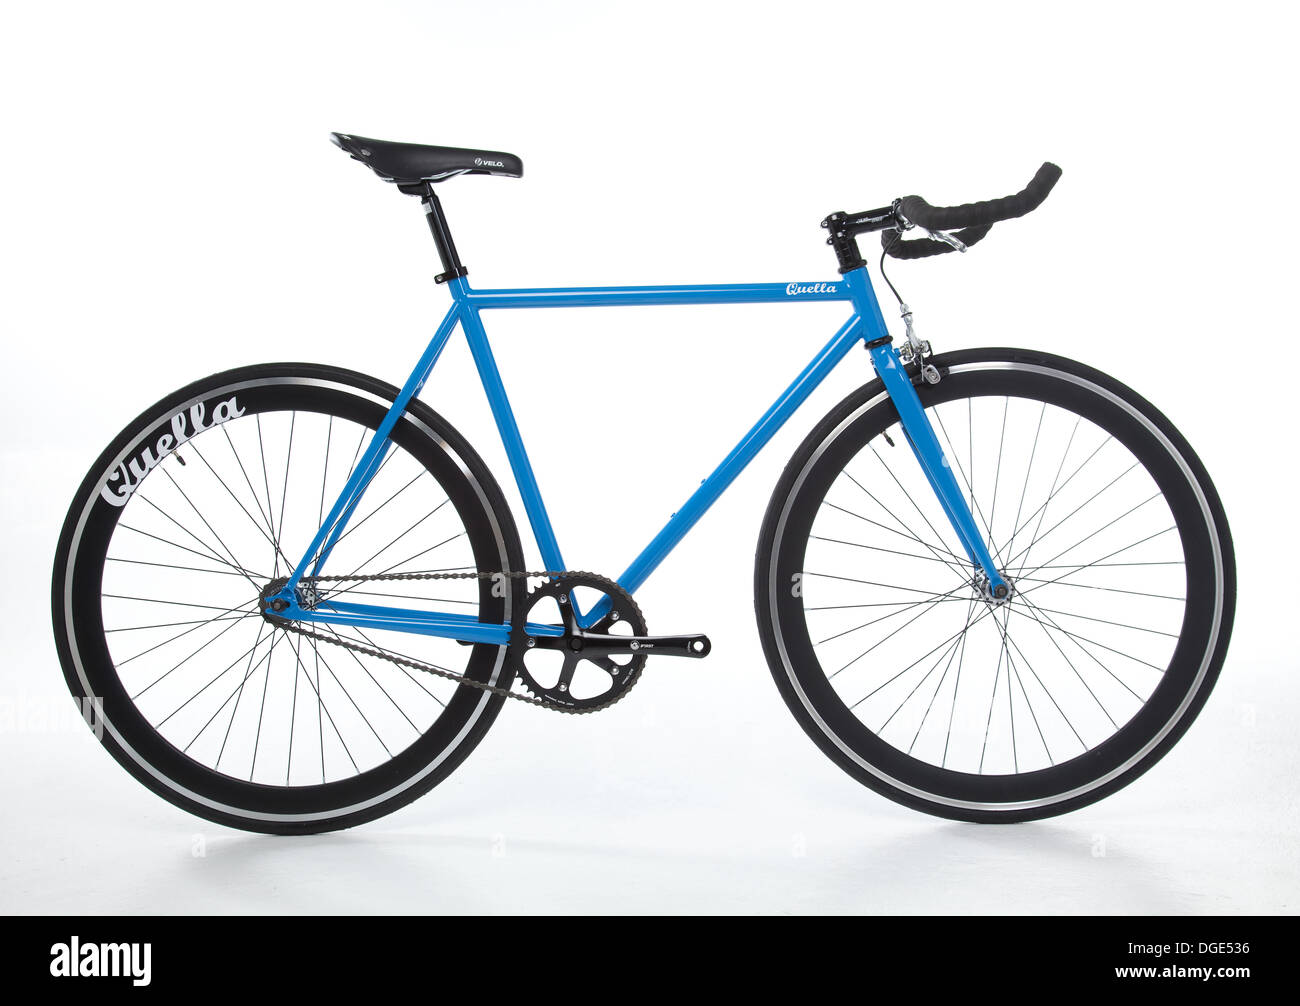 Fixed gear bicycle. Stock Photo